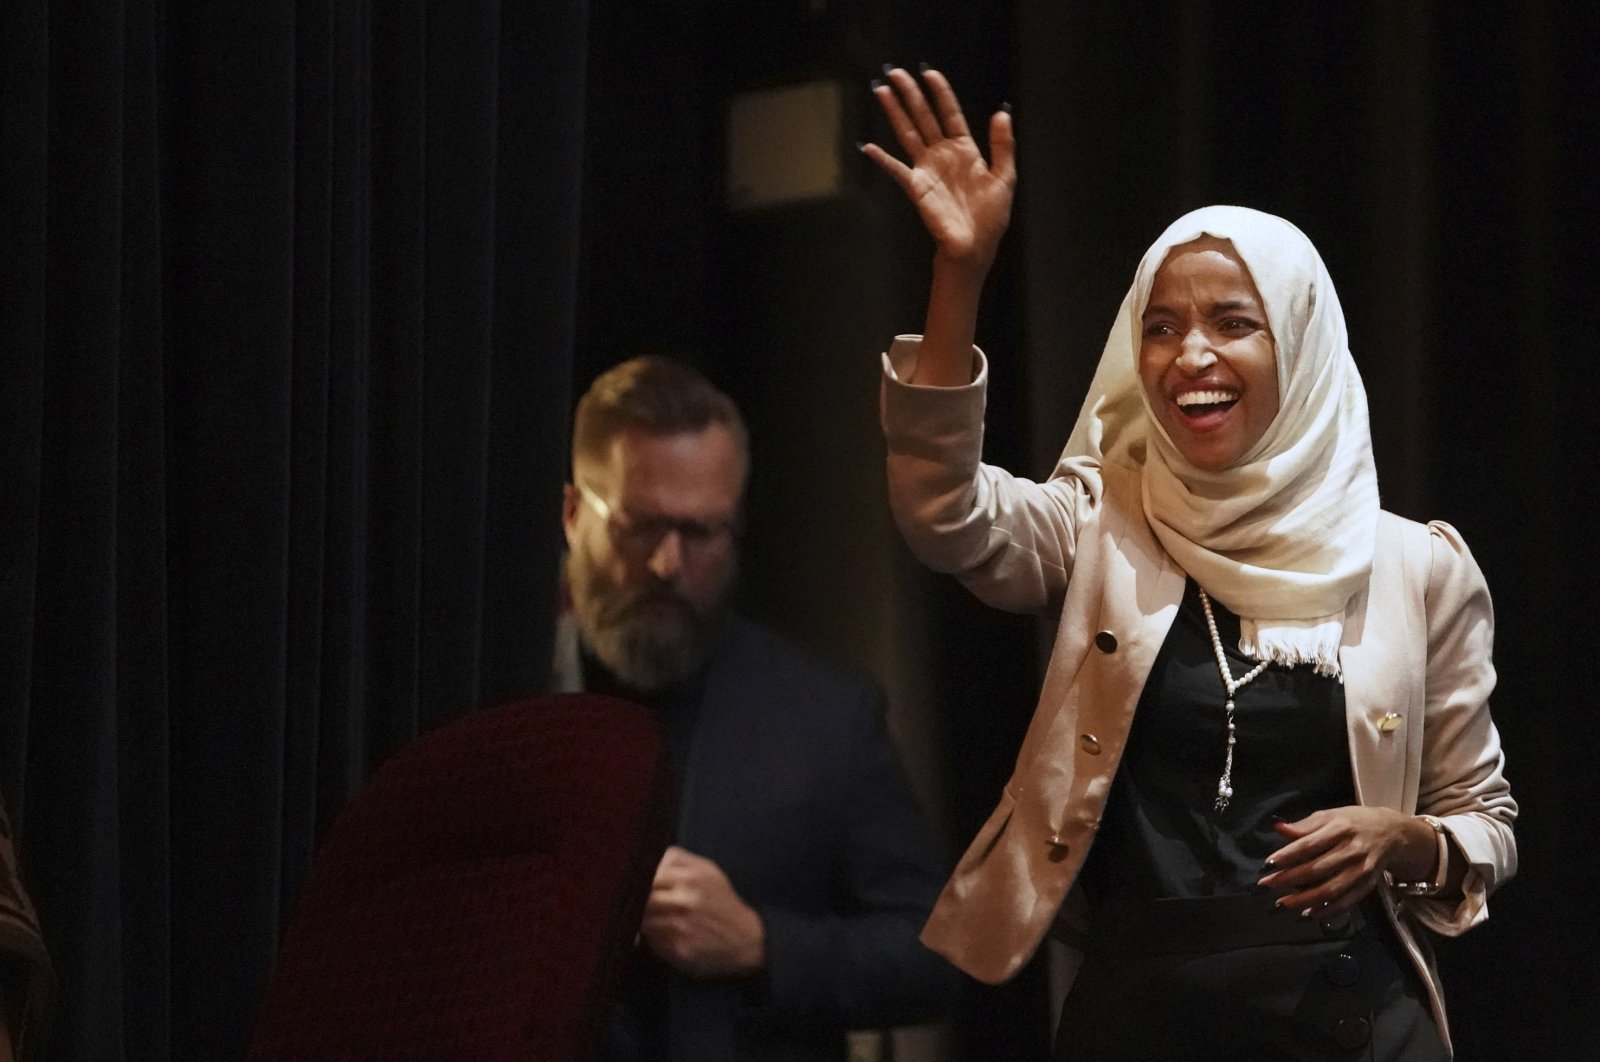 U.S. Rep. Ilhan Omar, D-Minn., holds a "Medicare for All" town hall with Rep. Pramila Jayapal, D-Wash., (not pictured) and other state lawmakers, Minneapolis, U.S., July 18, 2019. (AP Photo)